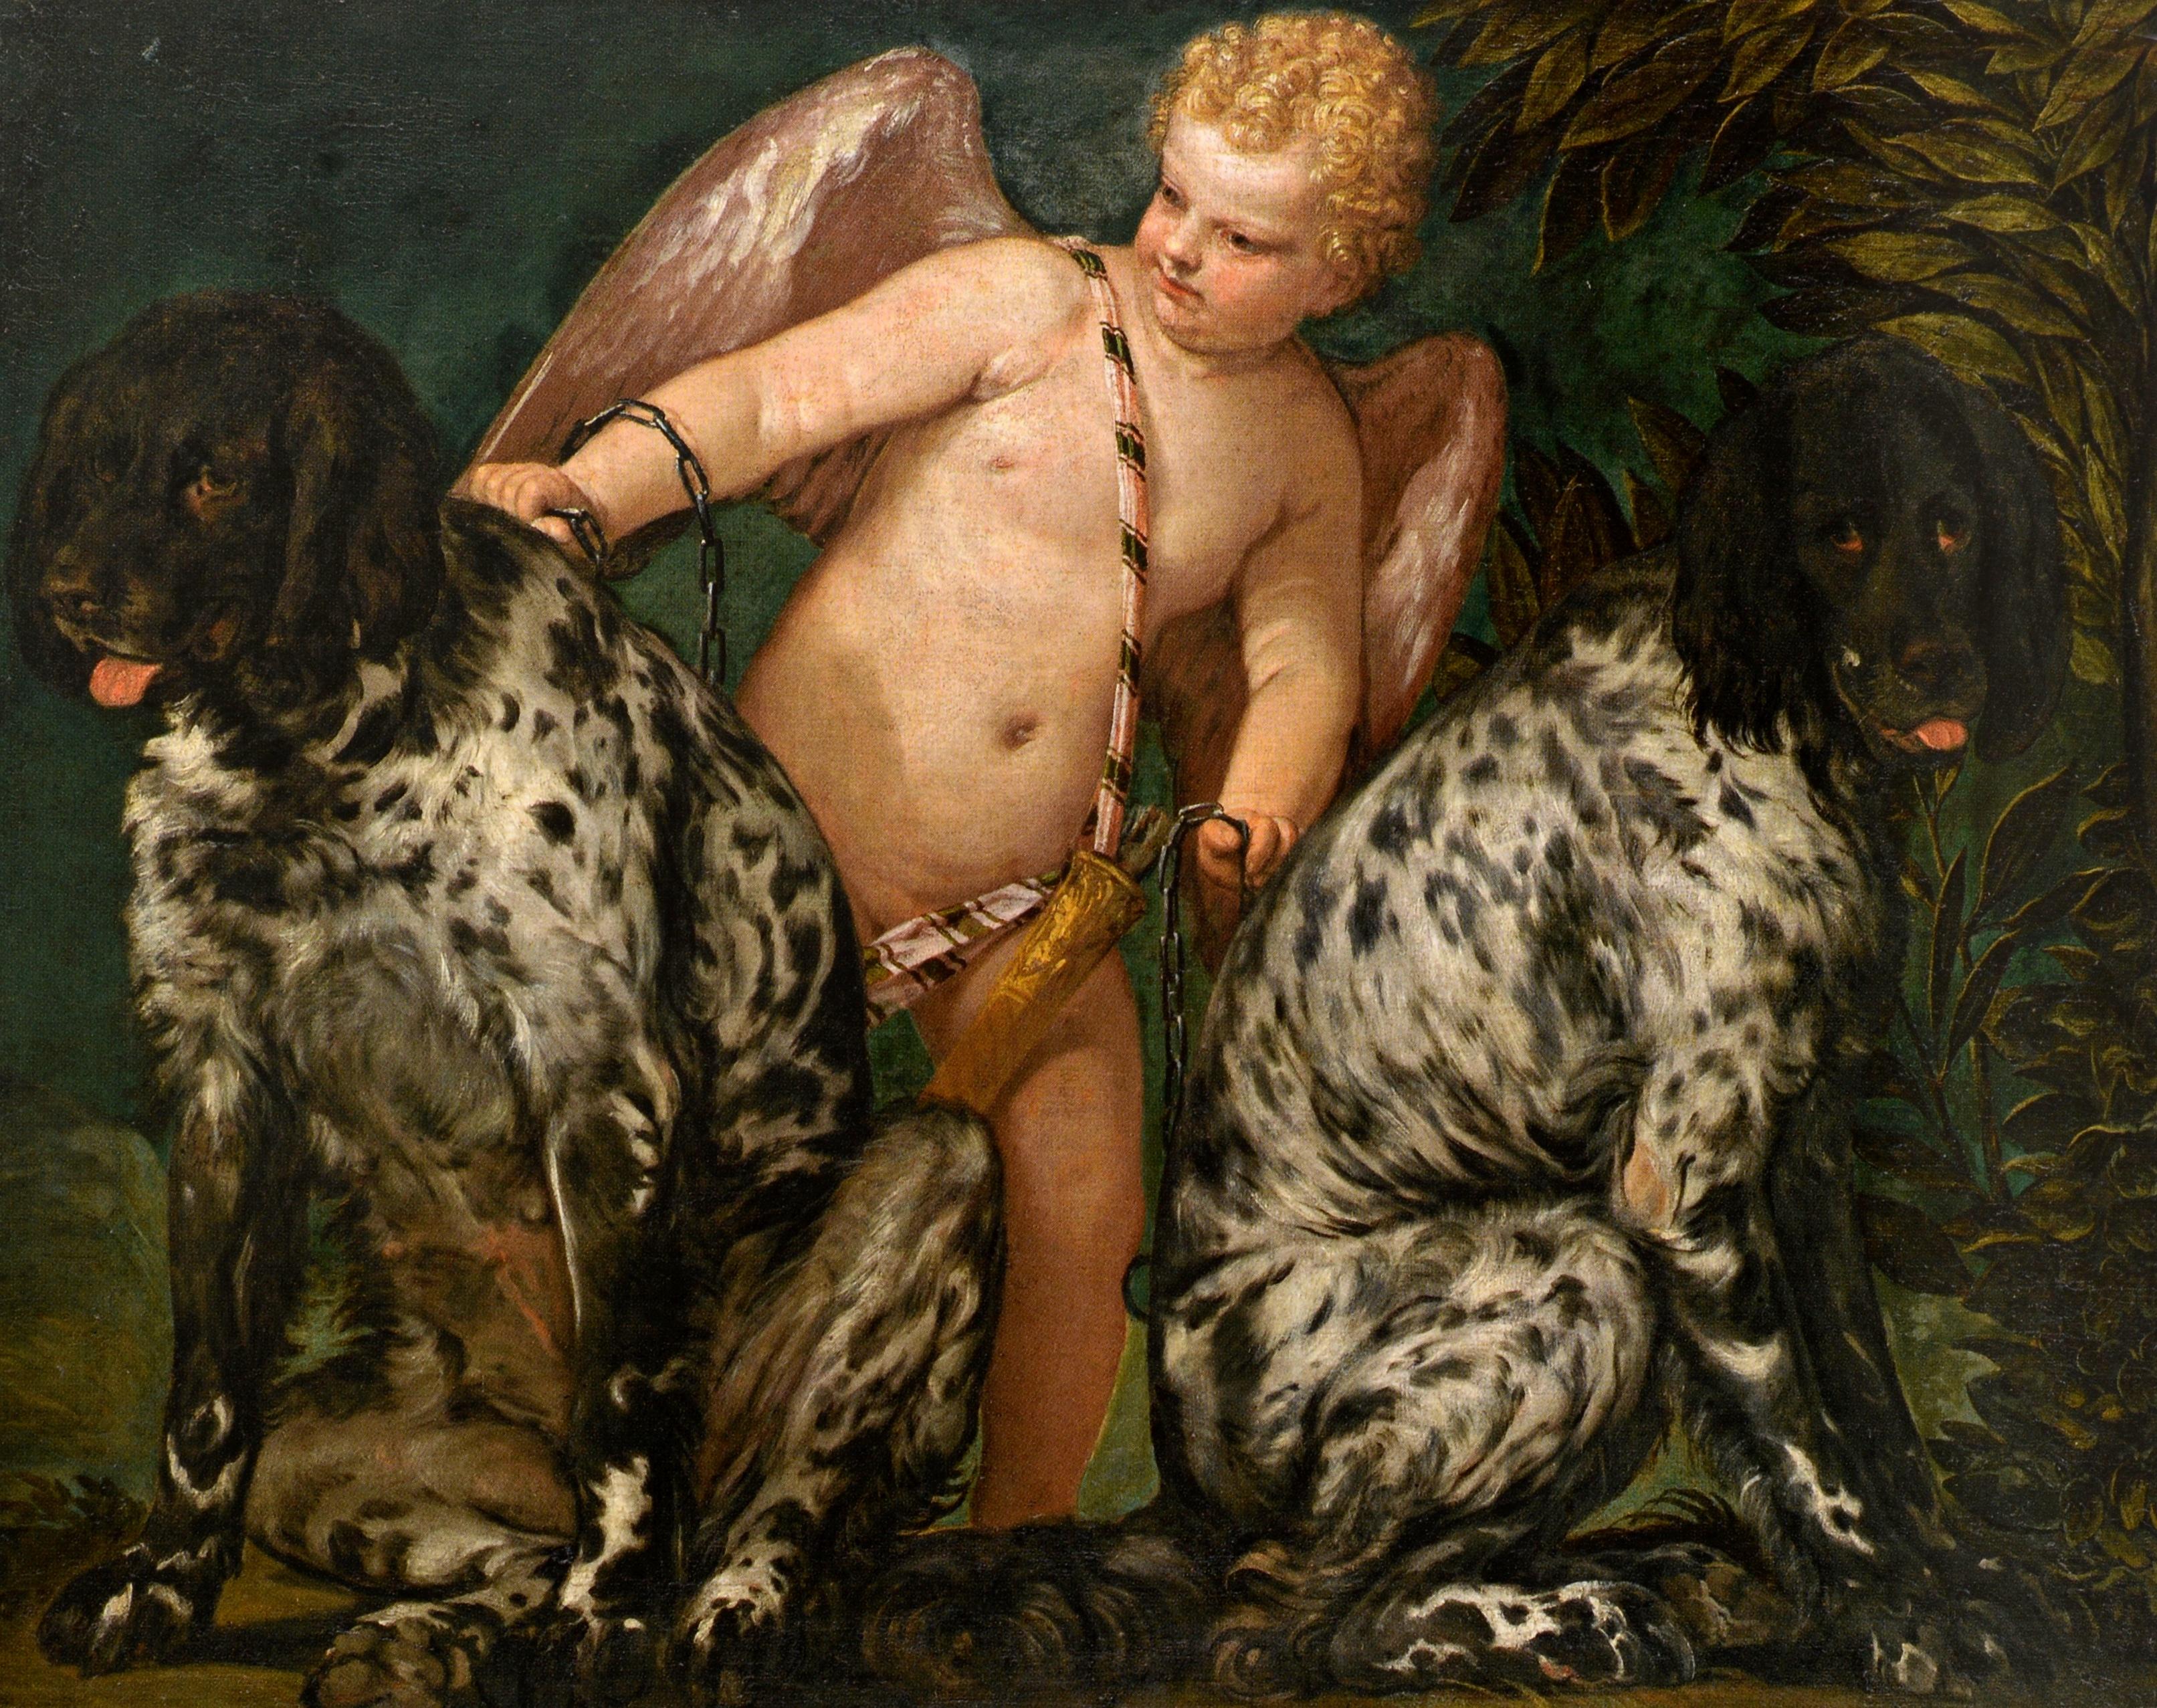 American Titian, Tintoretto, Veronese Rivals in Renaissance Venice, Stated 1st Ed For Sale